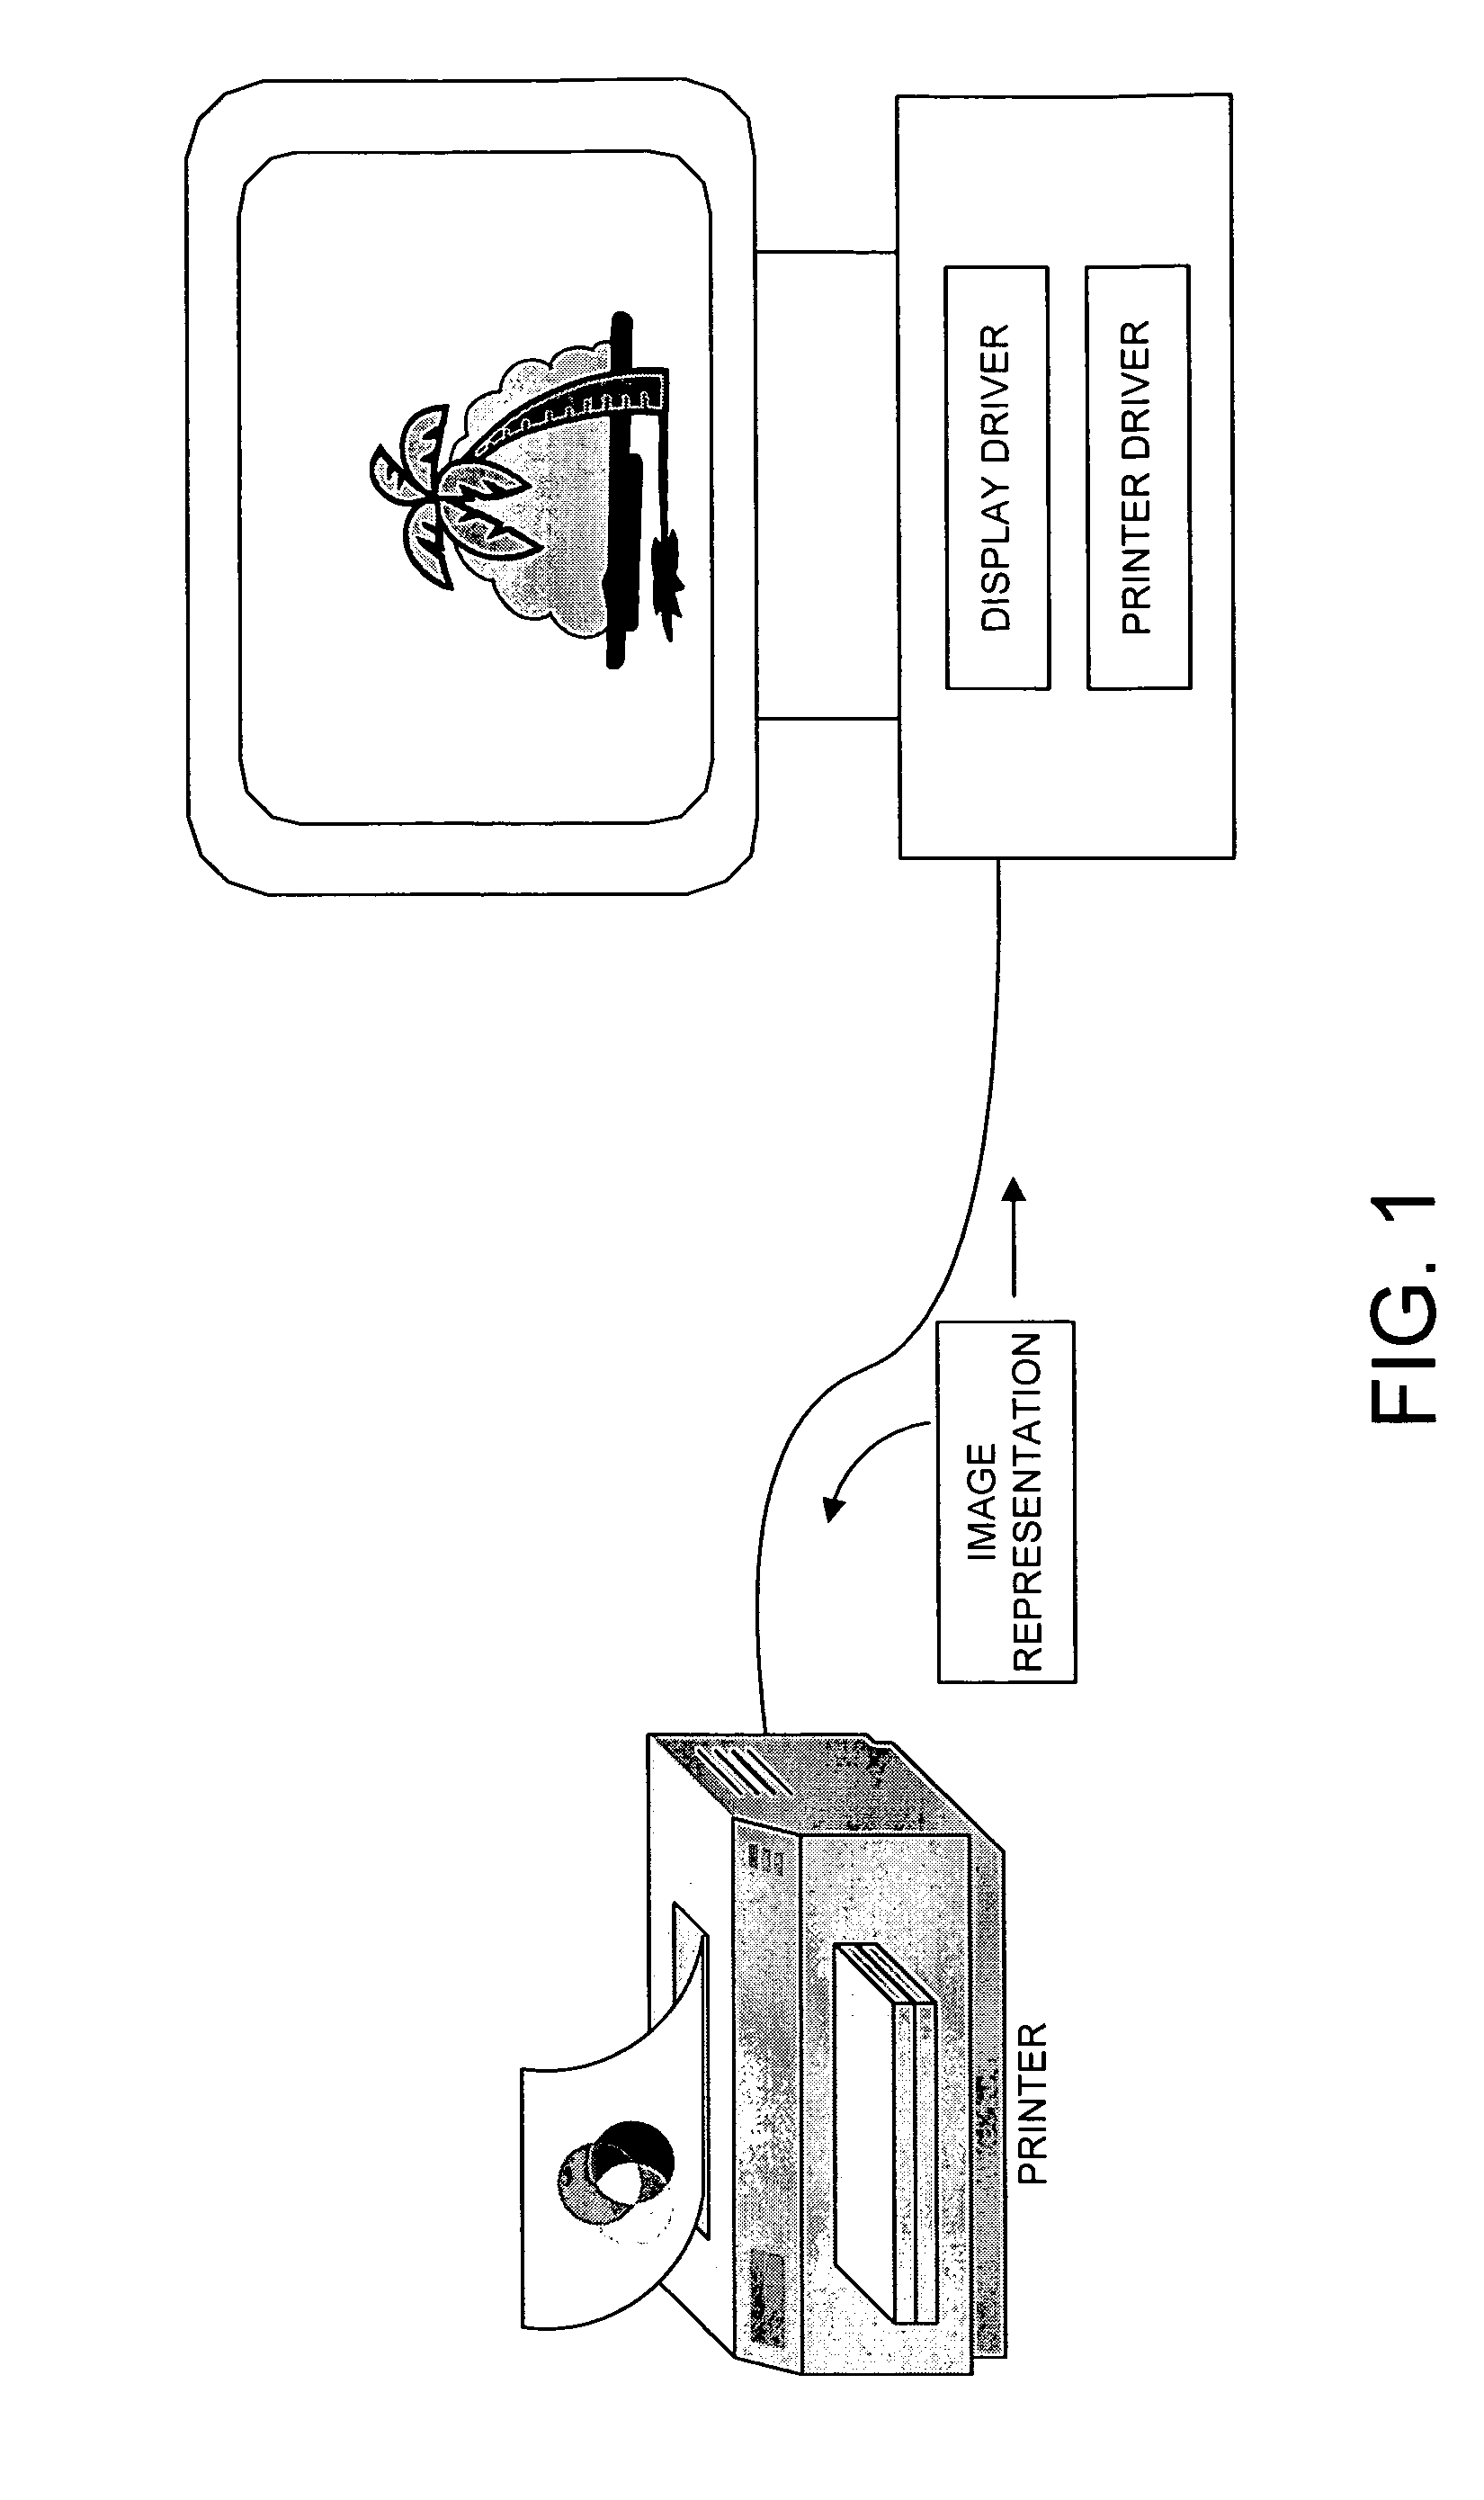 System and method for generating unified image output